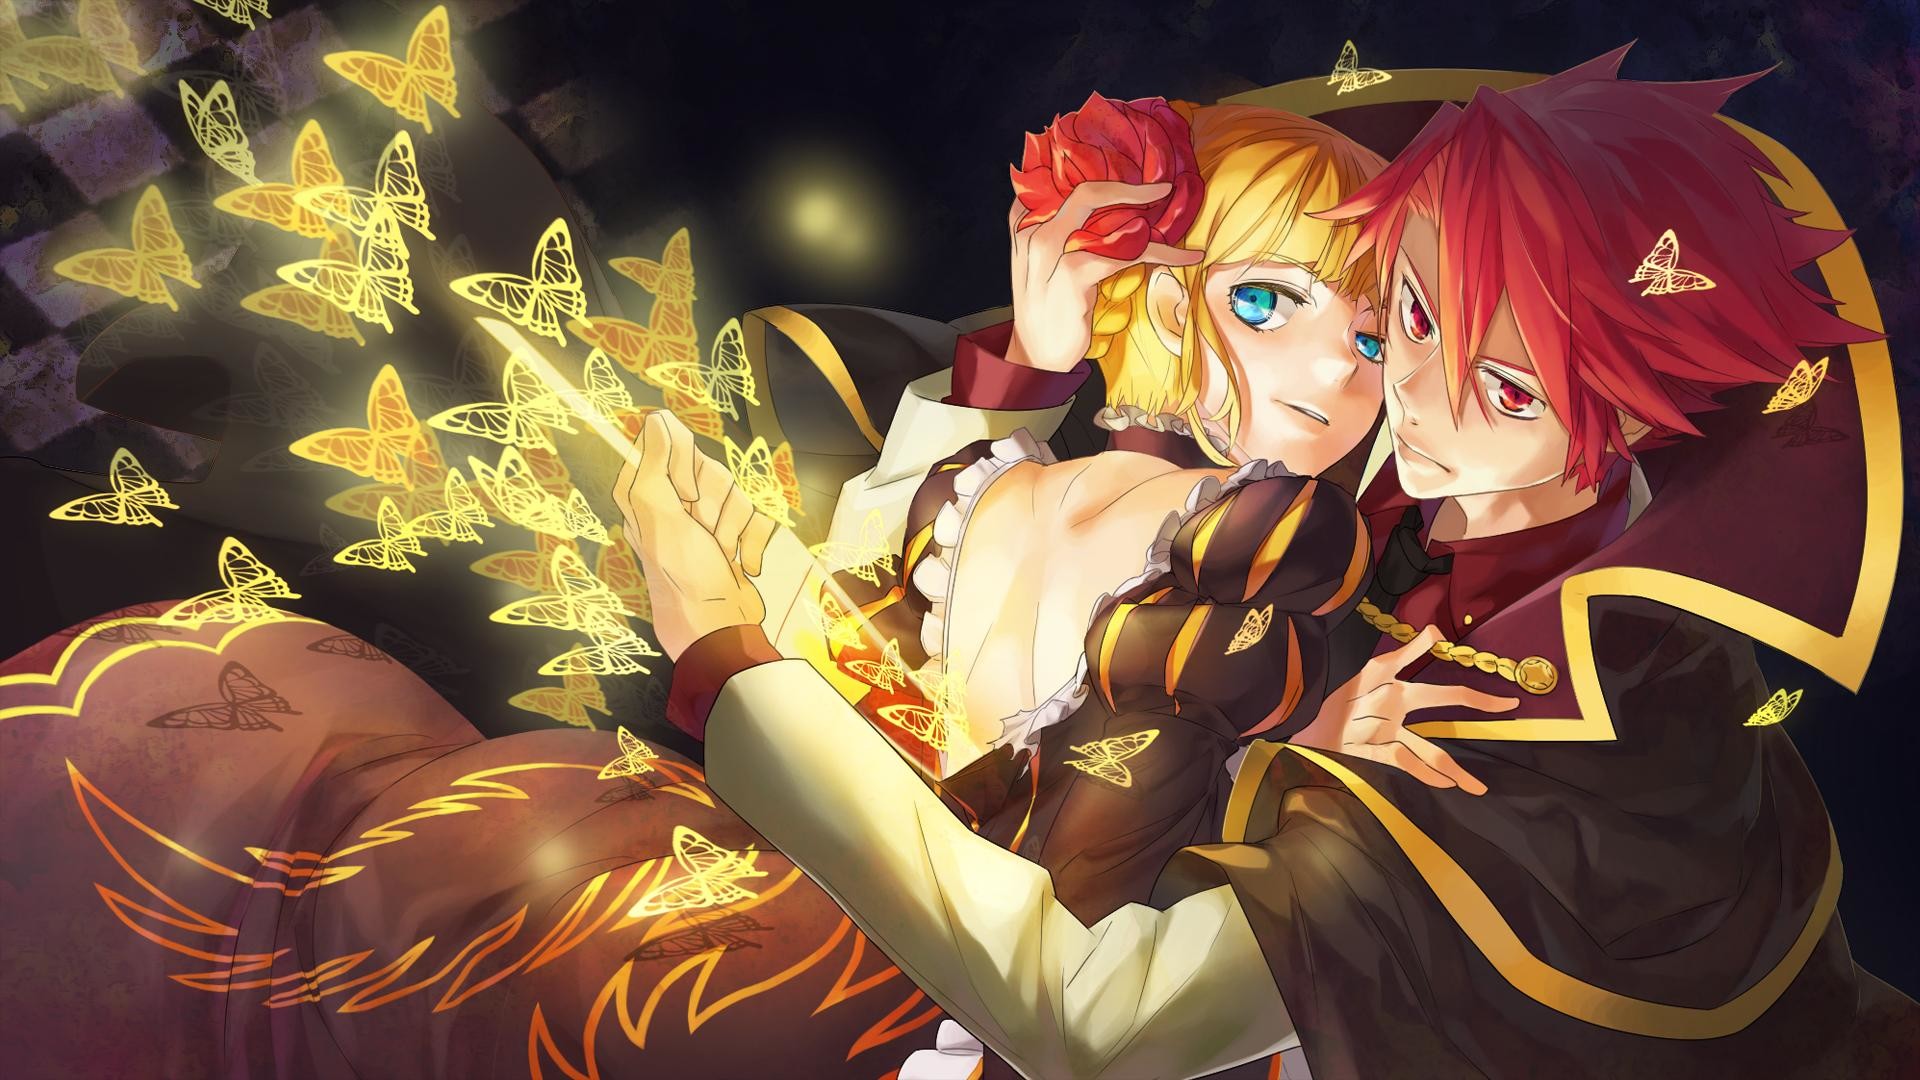 1920x1080 3D Anime Couple Images Free Download